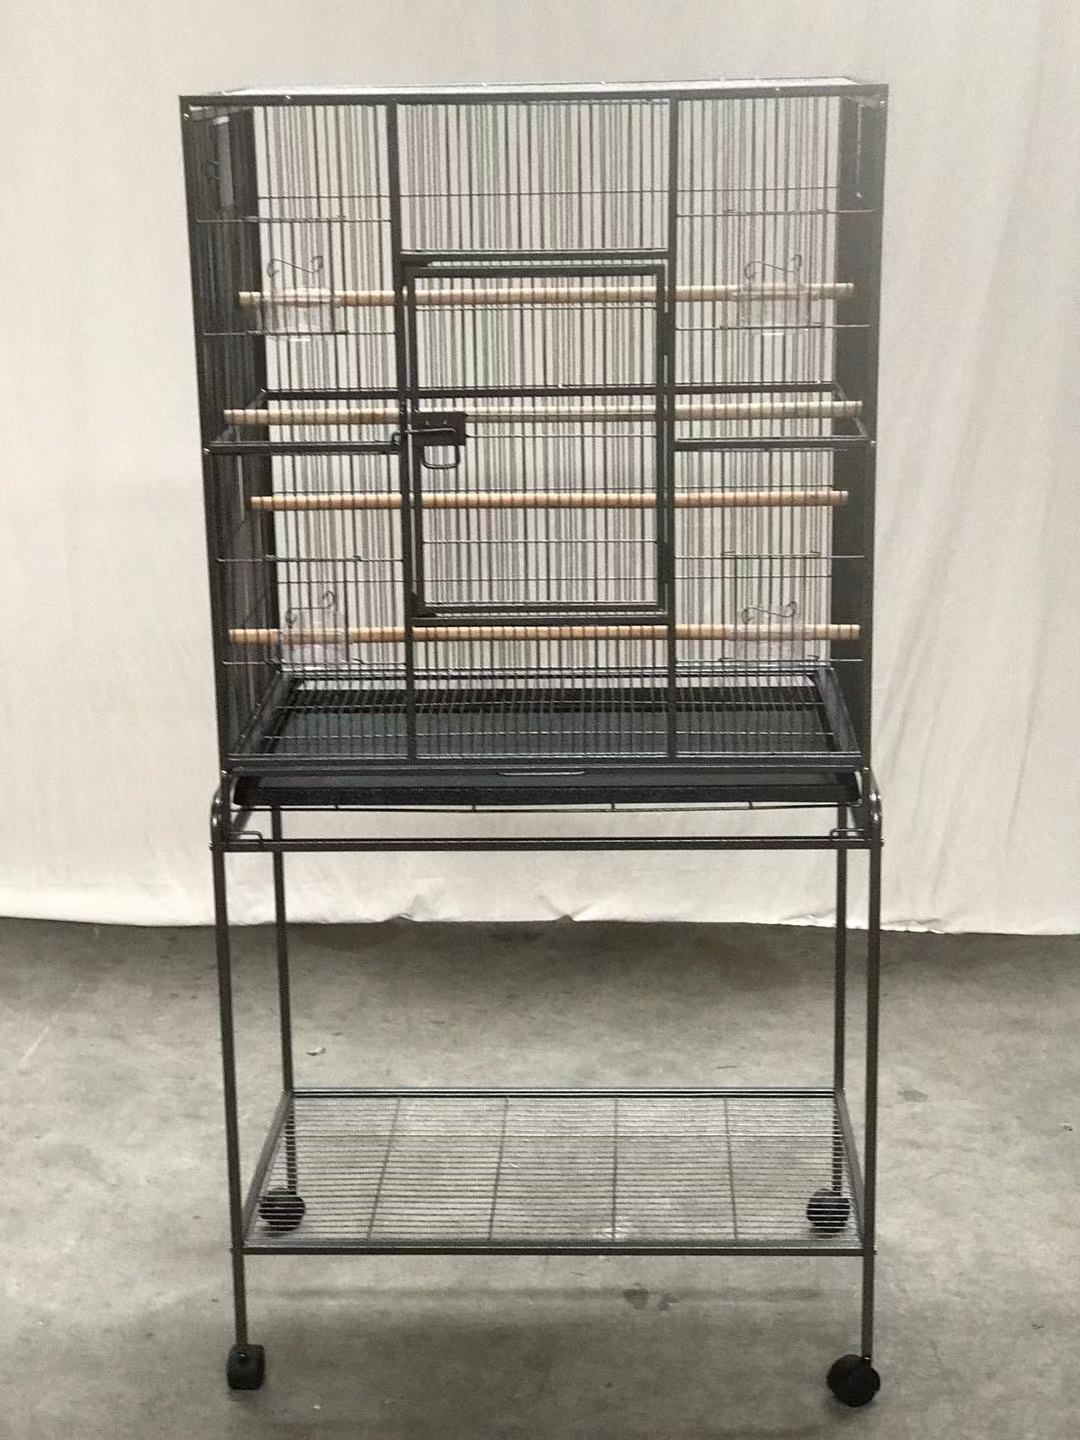 161 cm Bird Cage Parrot Aviary Pet Stand-alone Budgie Perch Castor Wheels - 0